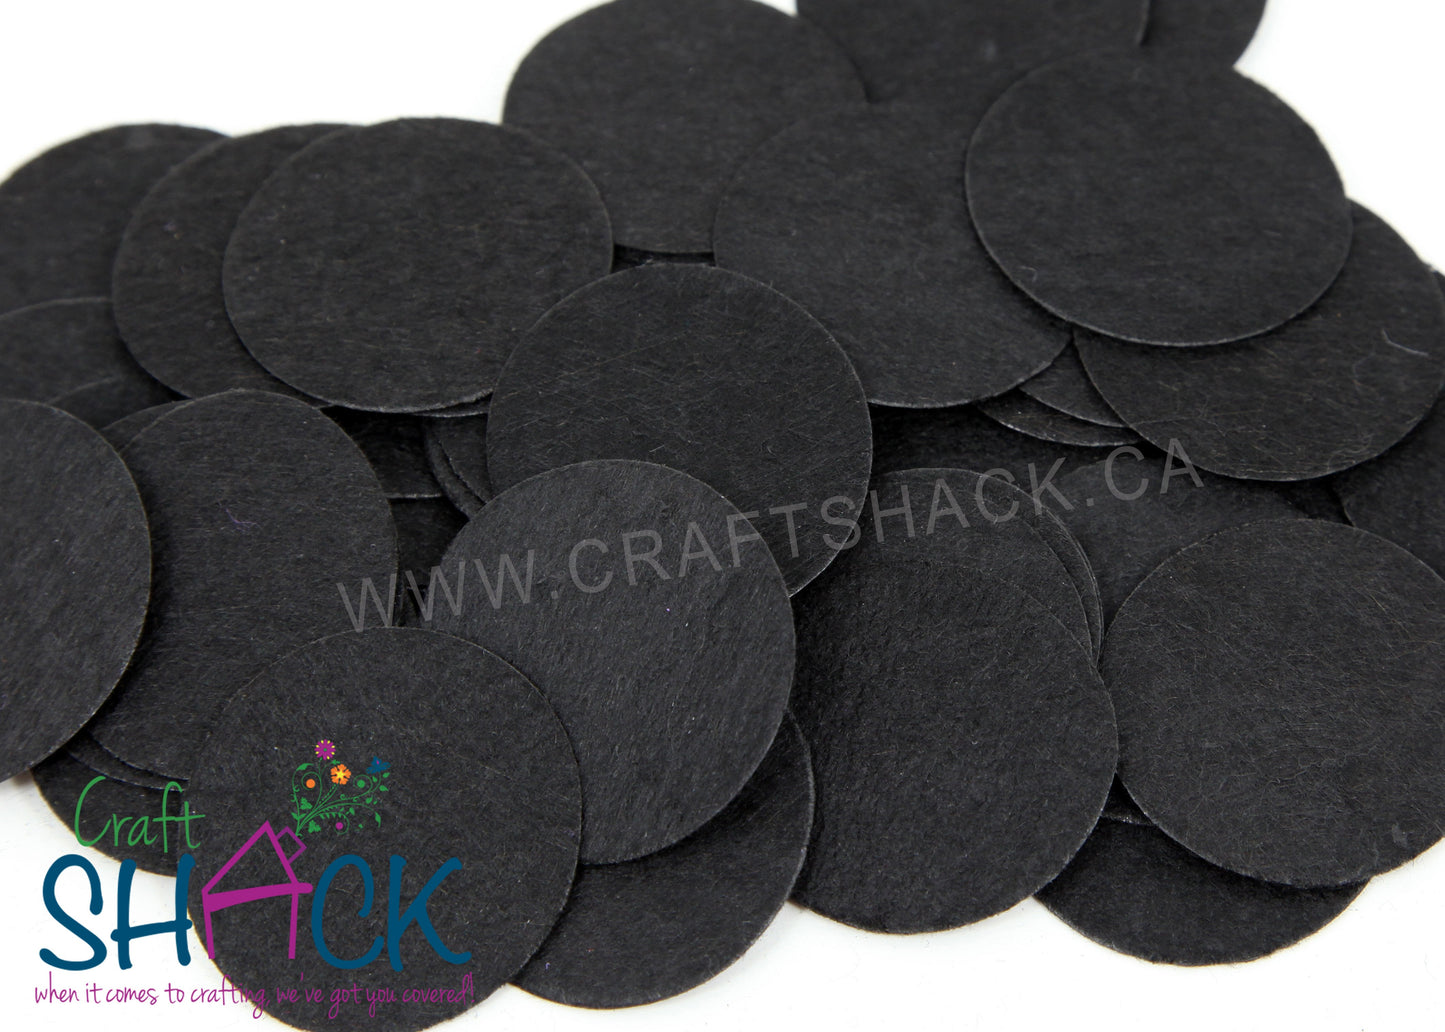 1.5" Felt Circles - sold in packs of 25 and 50